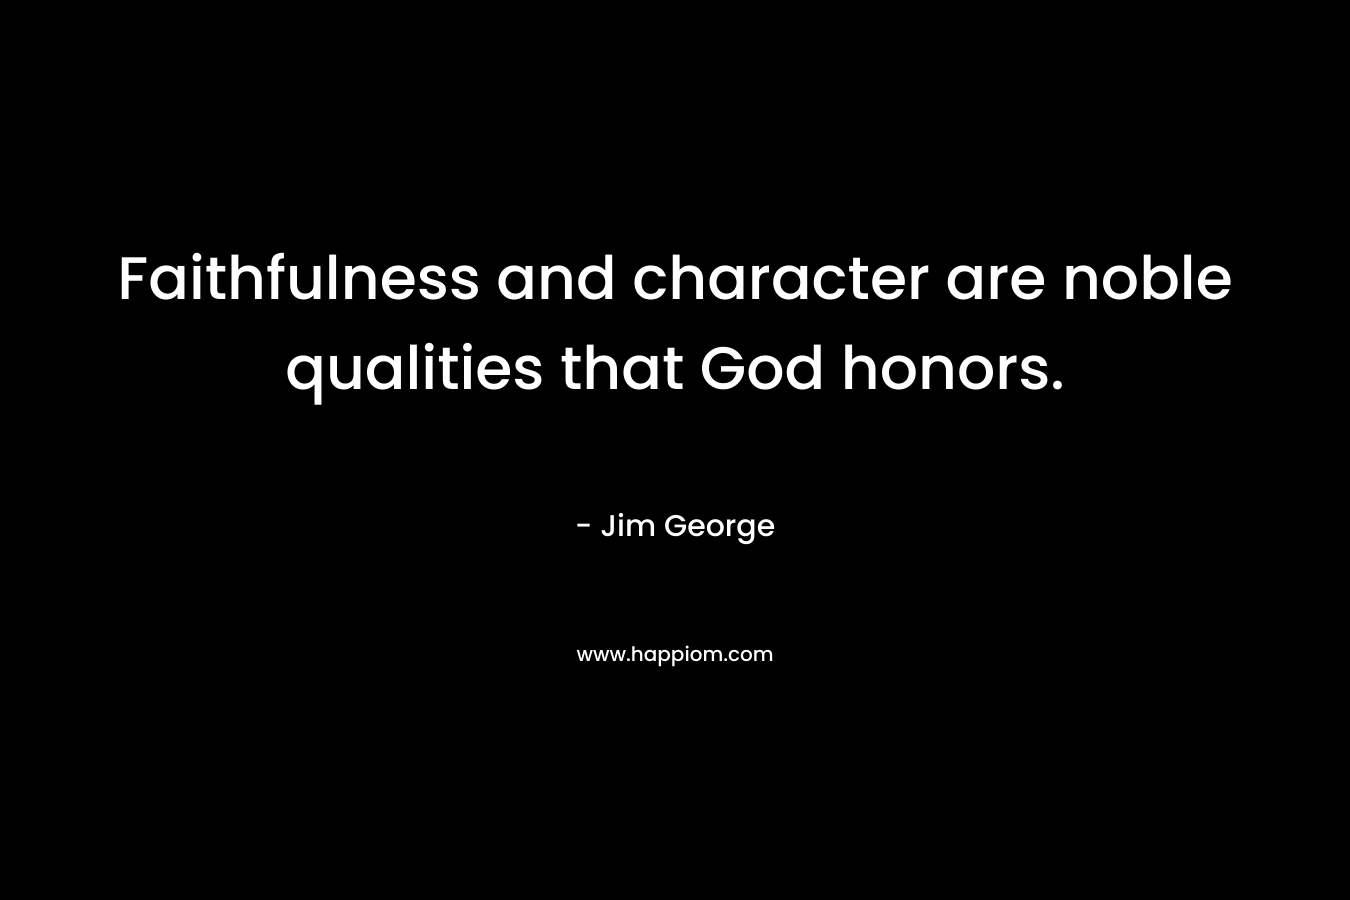 Faithfulness and character are noble qualities that God honors.